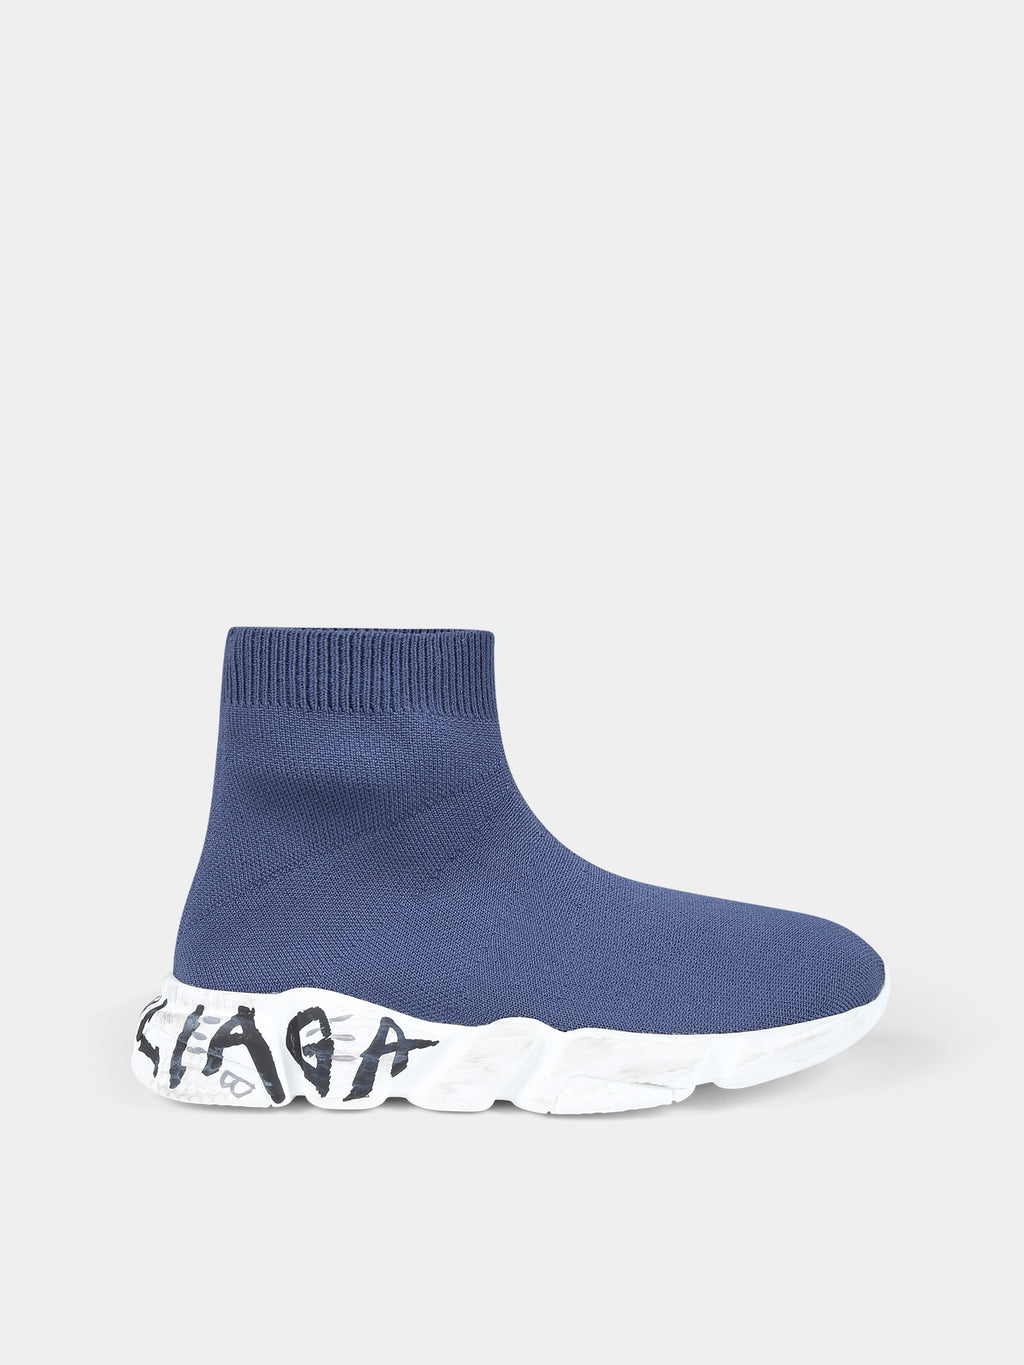 Blue sneakers for kids with logo